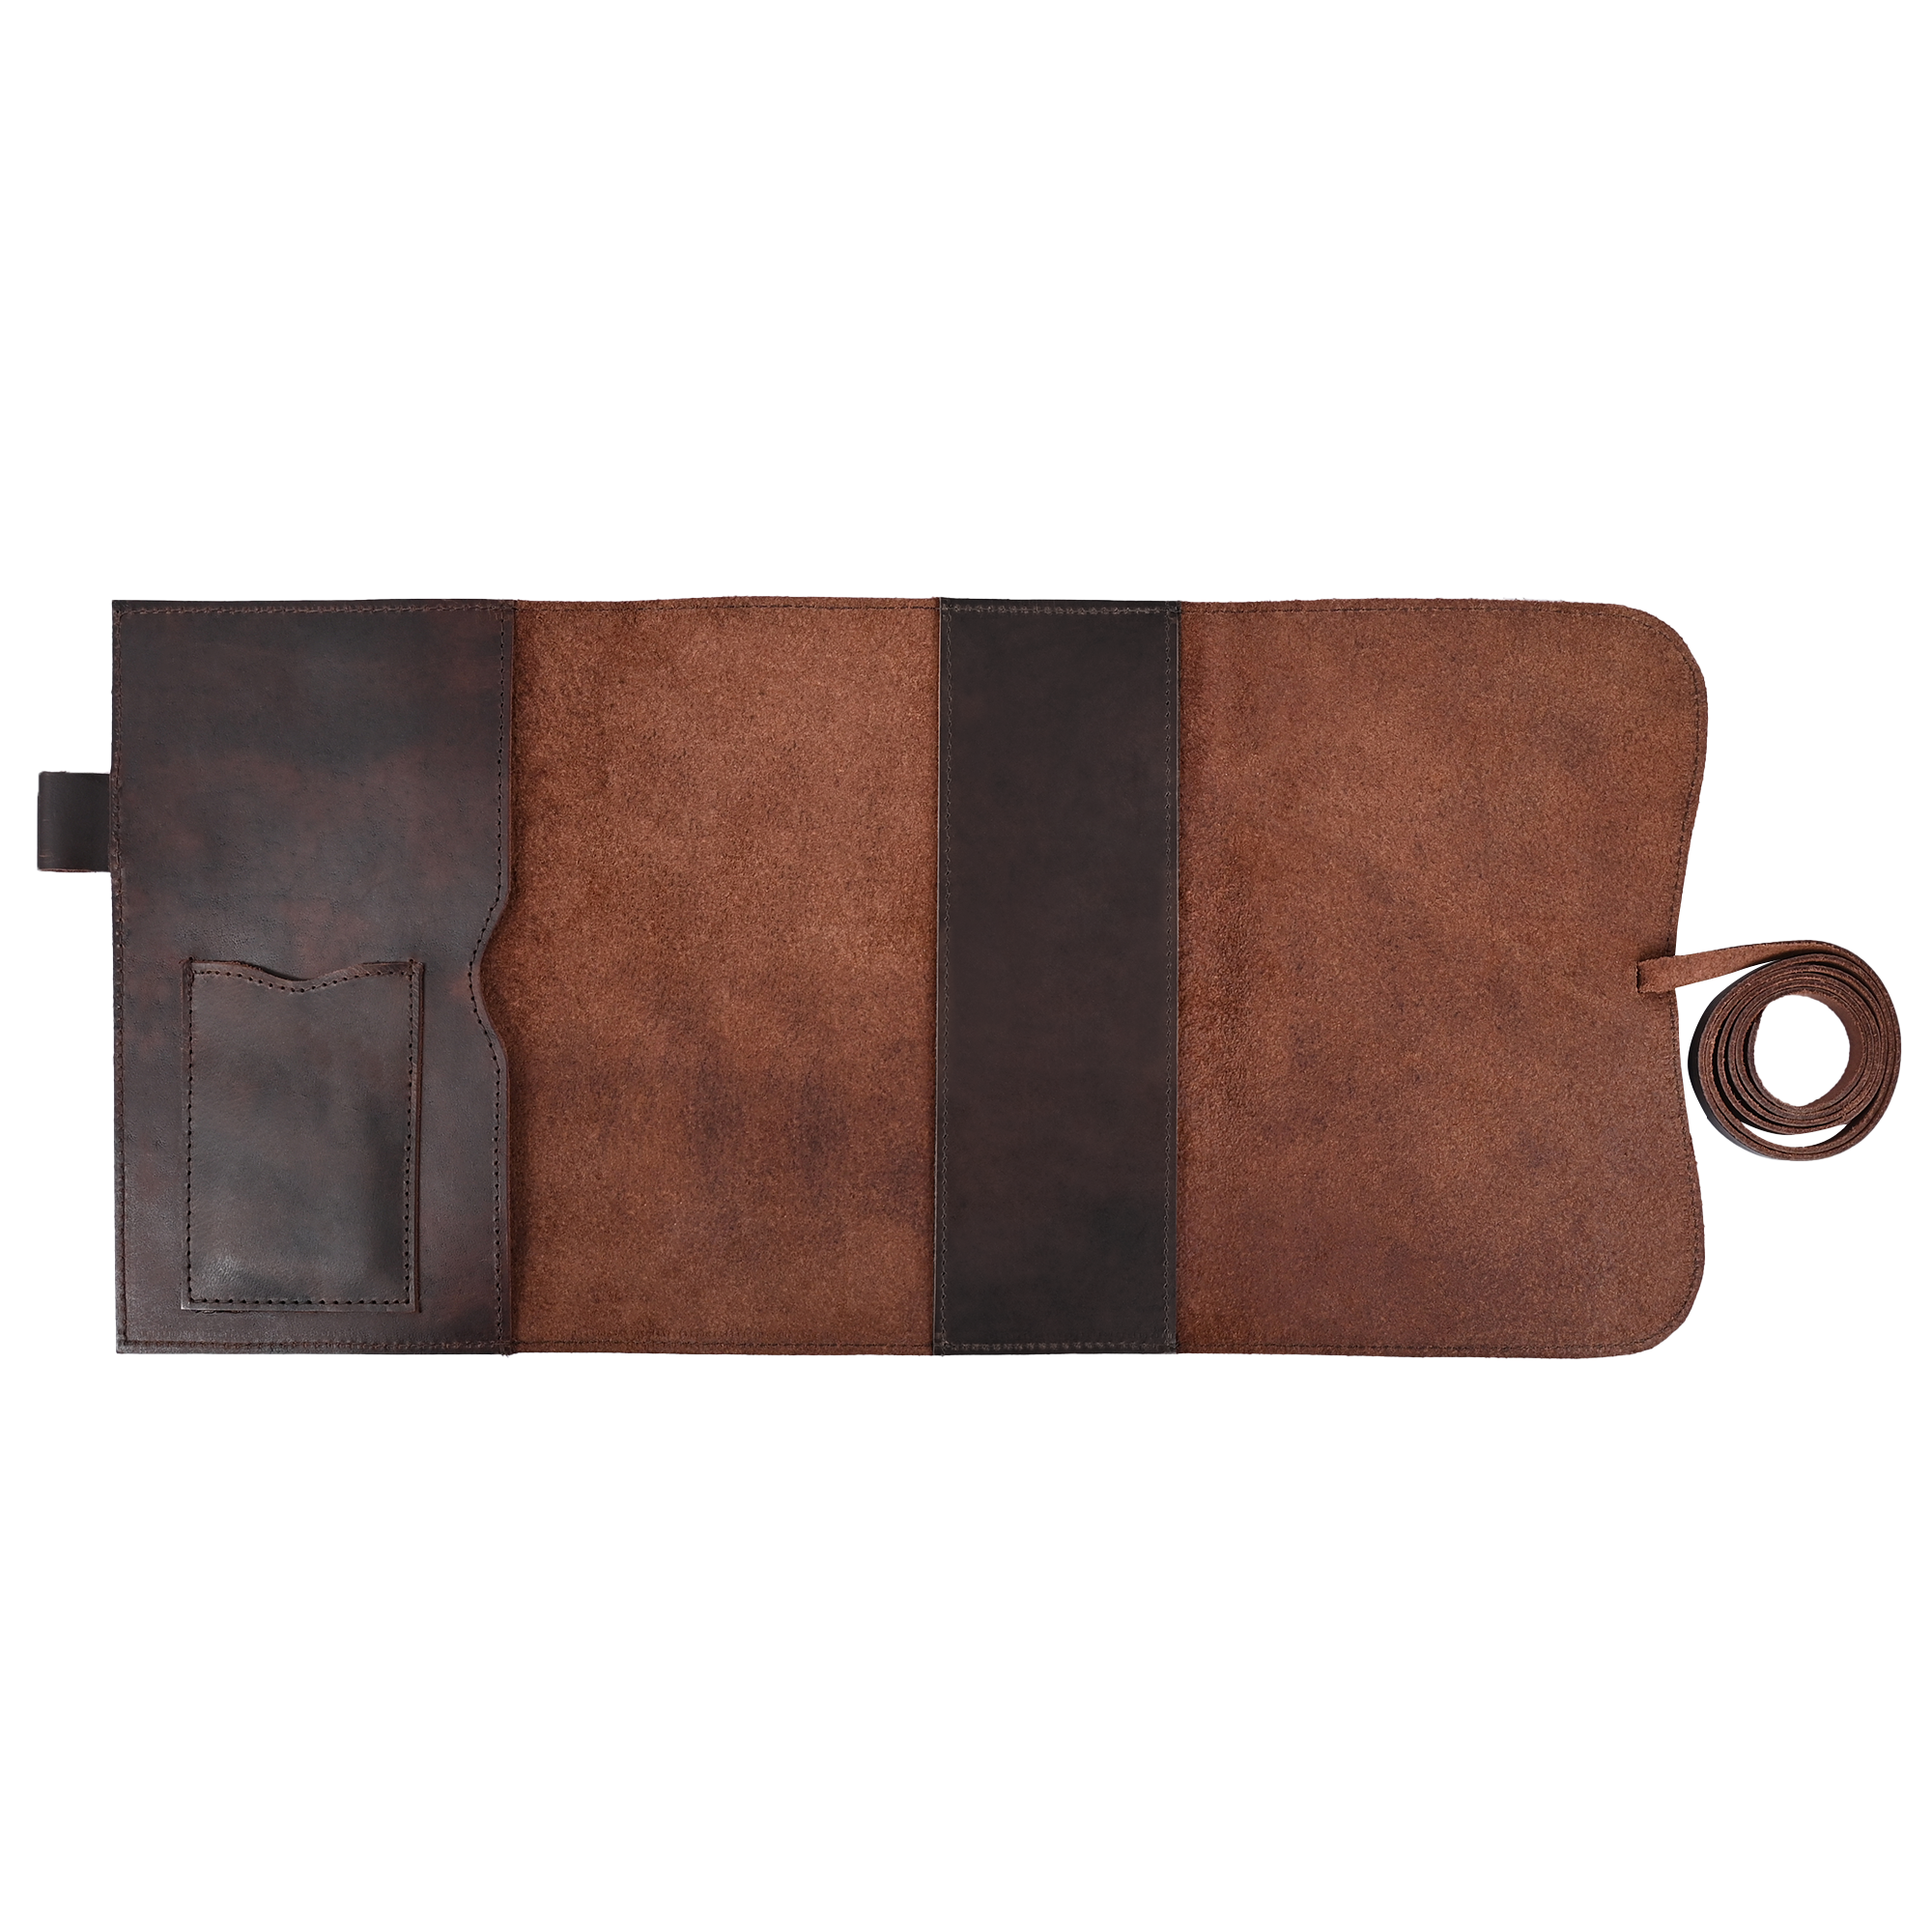 Vintage Leather Bible Cover